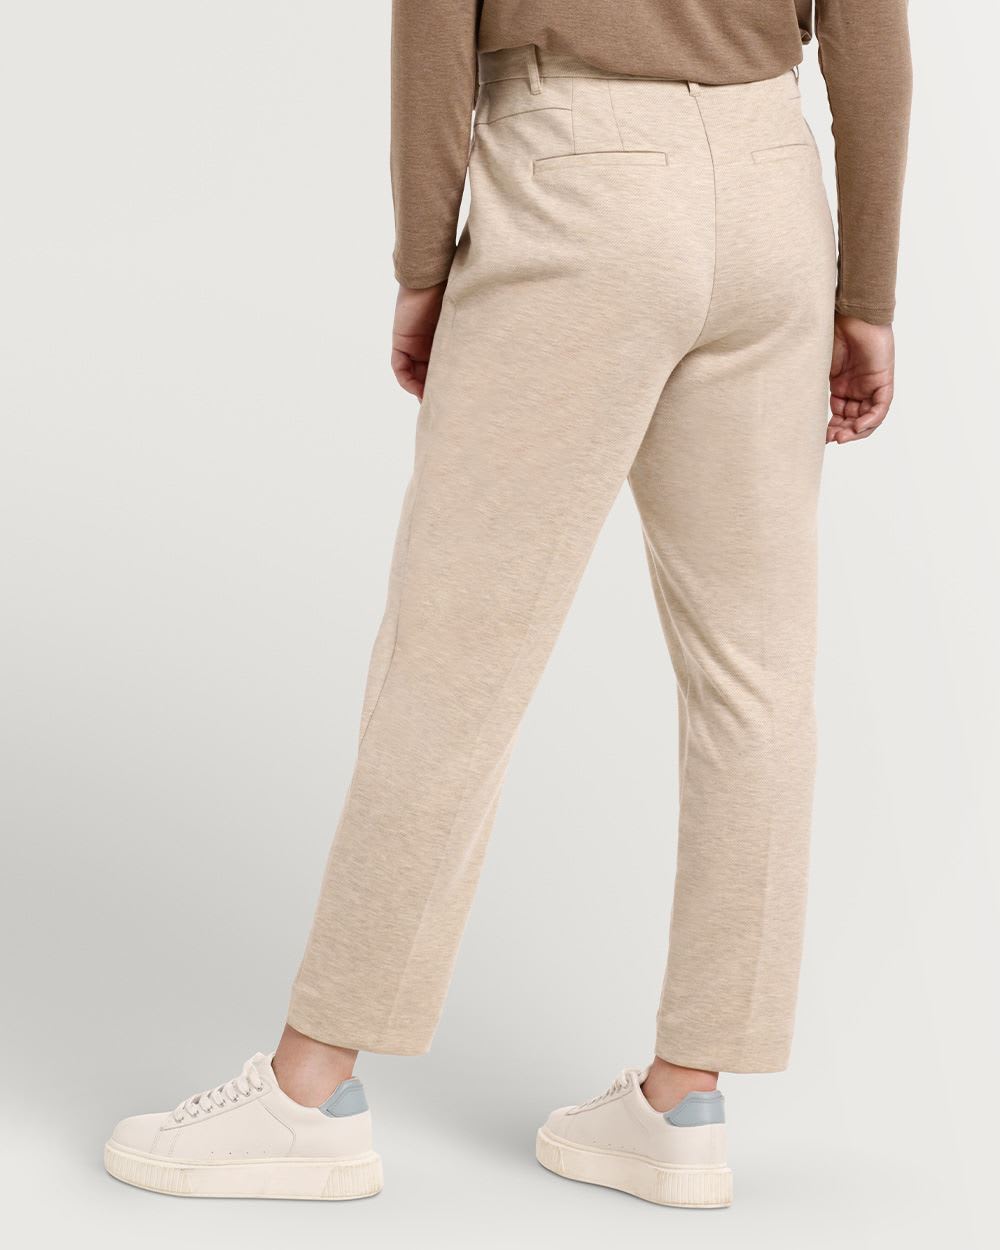 Textured Tapered Leg Modern Stretch Trousers - Petite